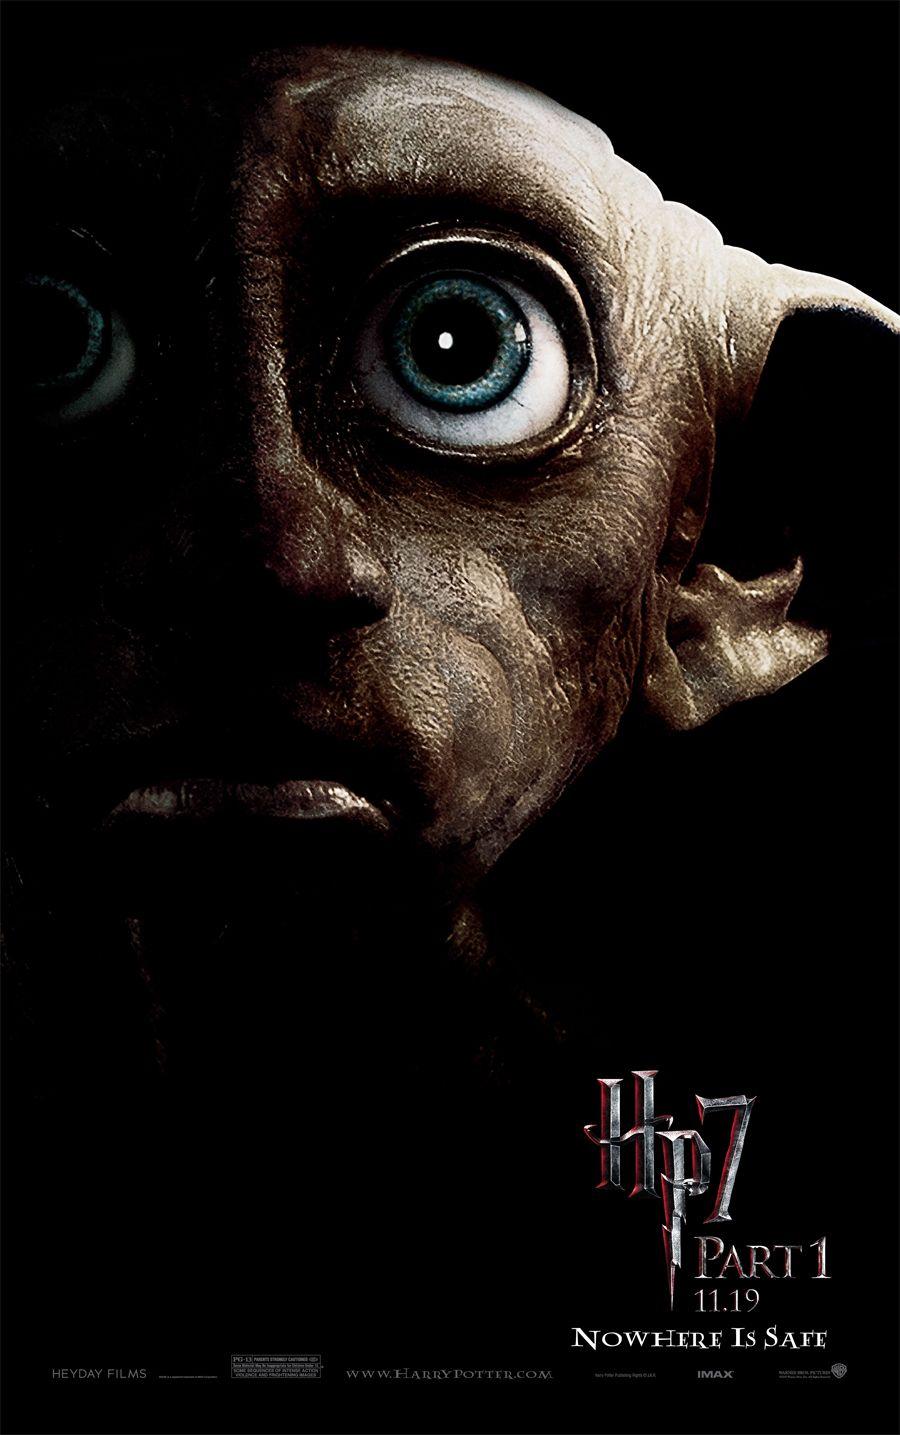 Dobby the House Elf from Harry Potter and the Deathly Hallows